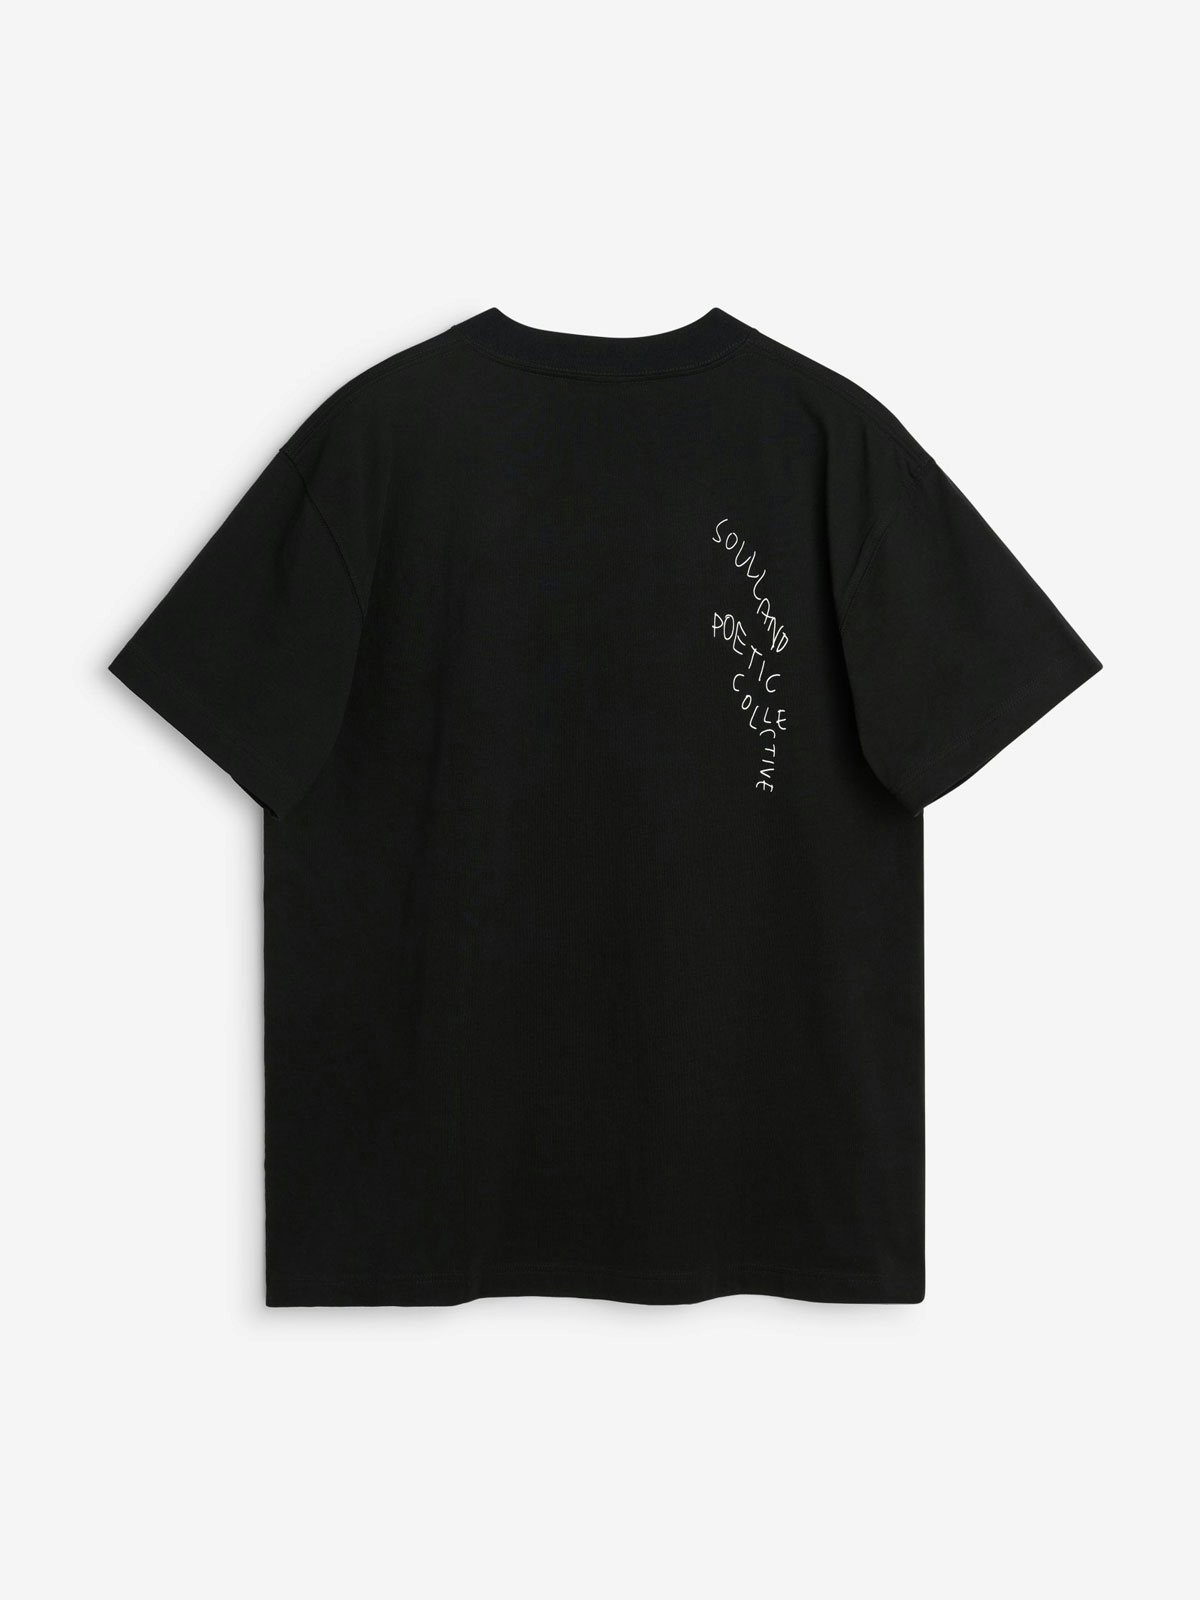 Poetic Collective Soulland x Poetic Collective T-shirt Black 2